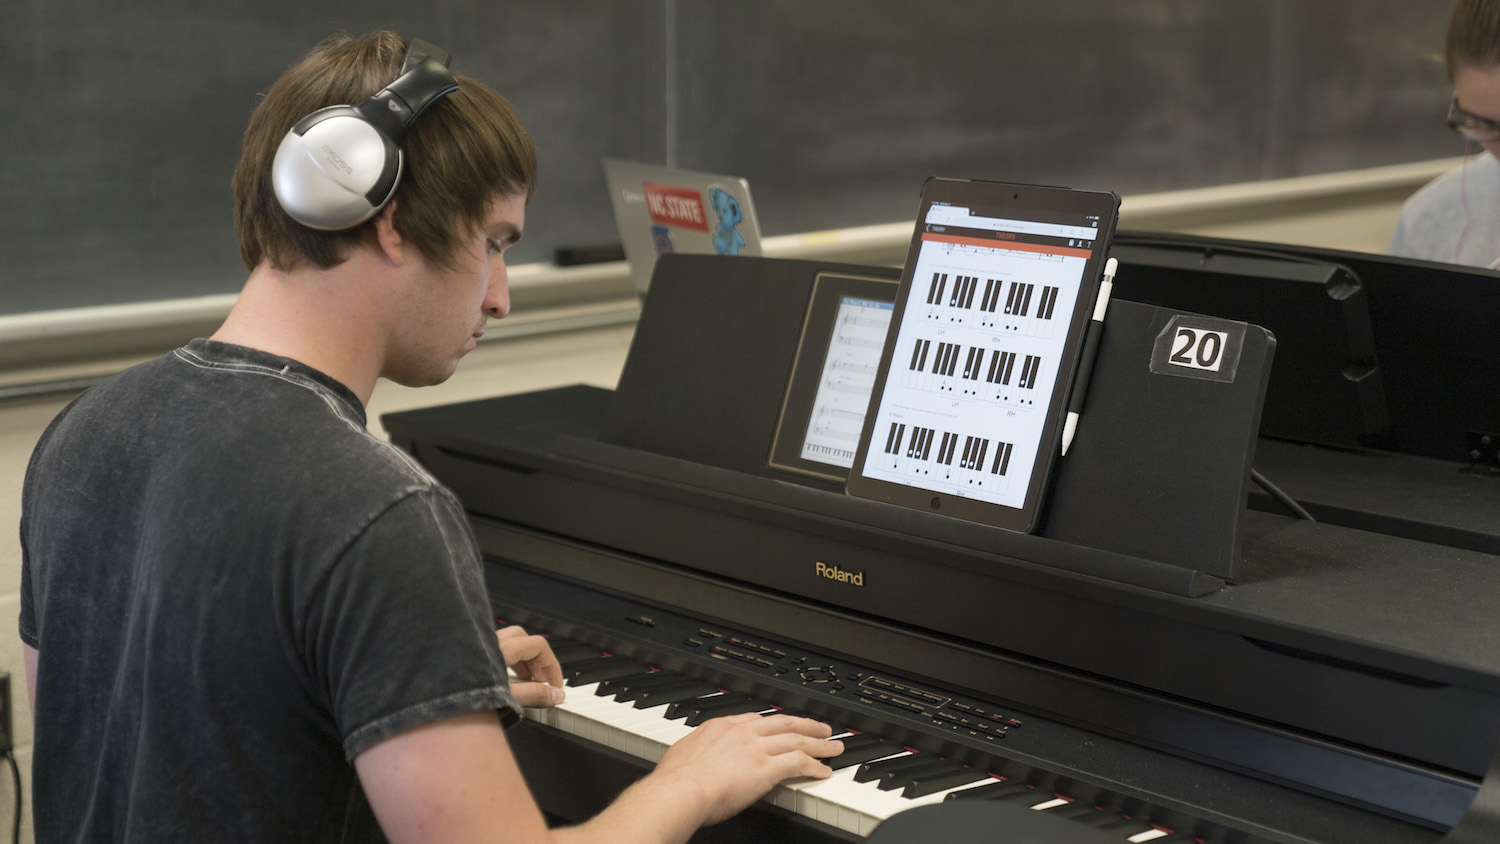 Lucas Sanders practices playing piano using the Piano+ interactive method book created through a DELTA Grant in partnership with Olga Kleiankina from the Department of Music. Photo by Erin Zanders. The student is playing piano and has a tablet in front of him with the Piano+ loaded on the screen.